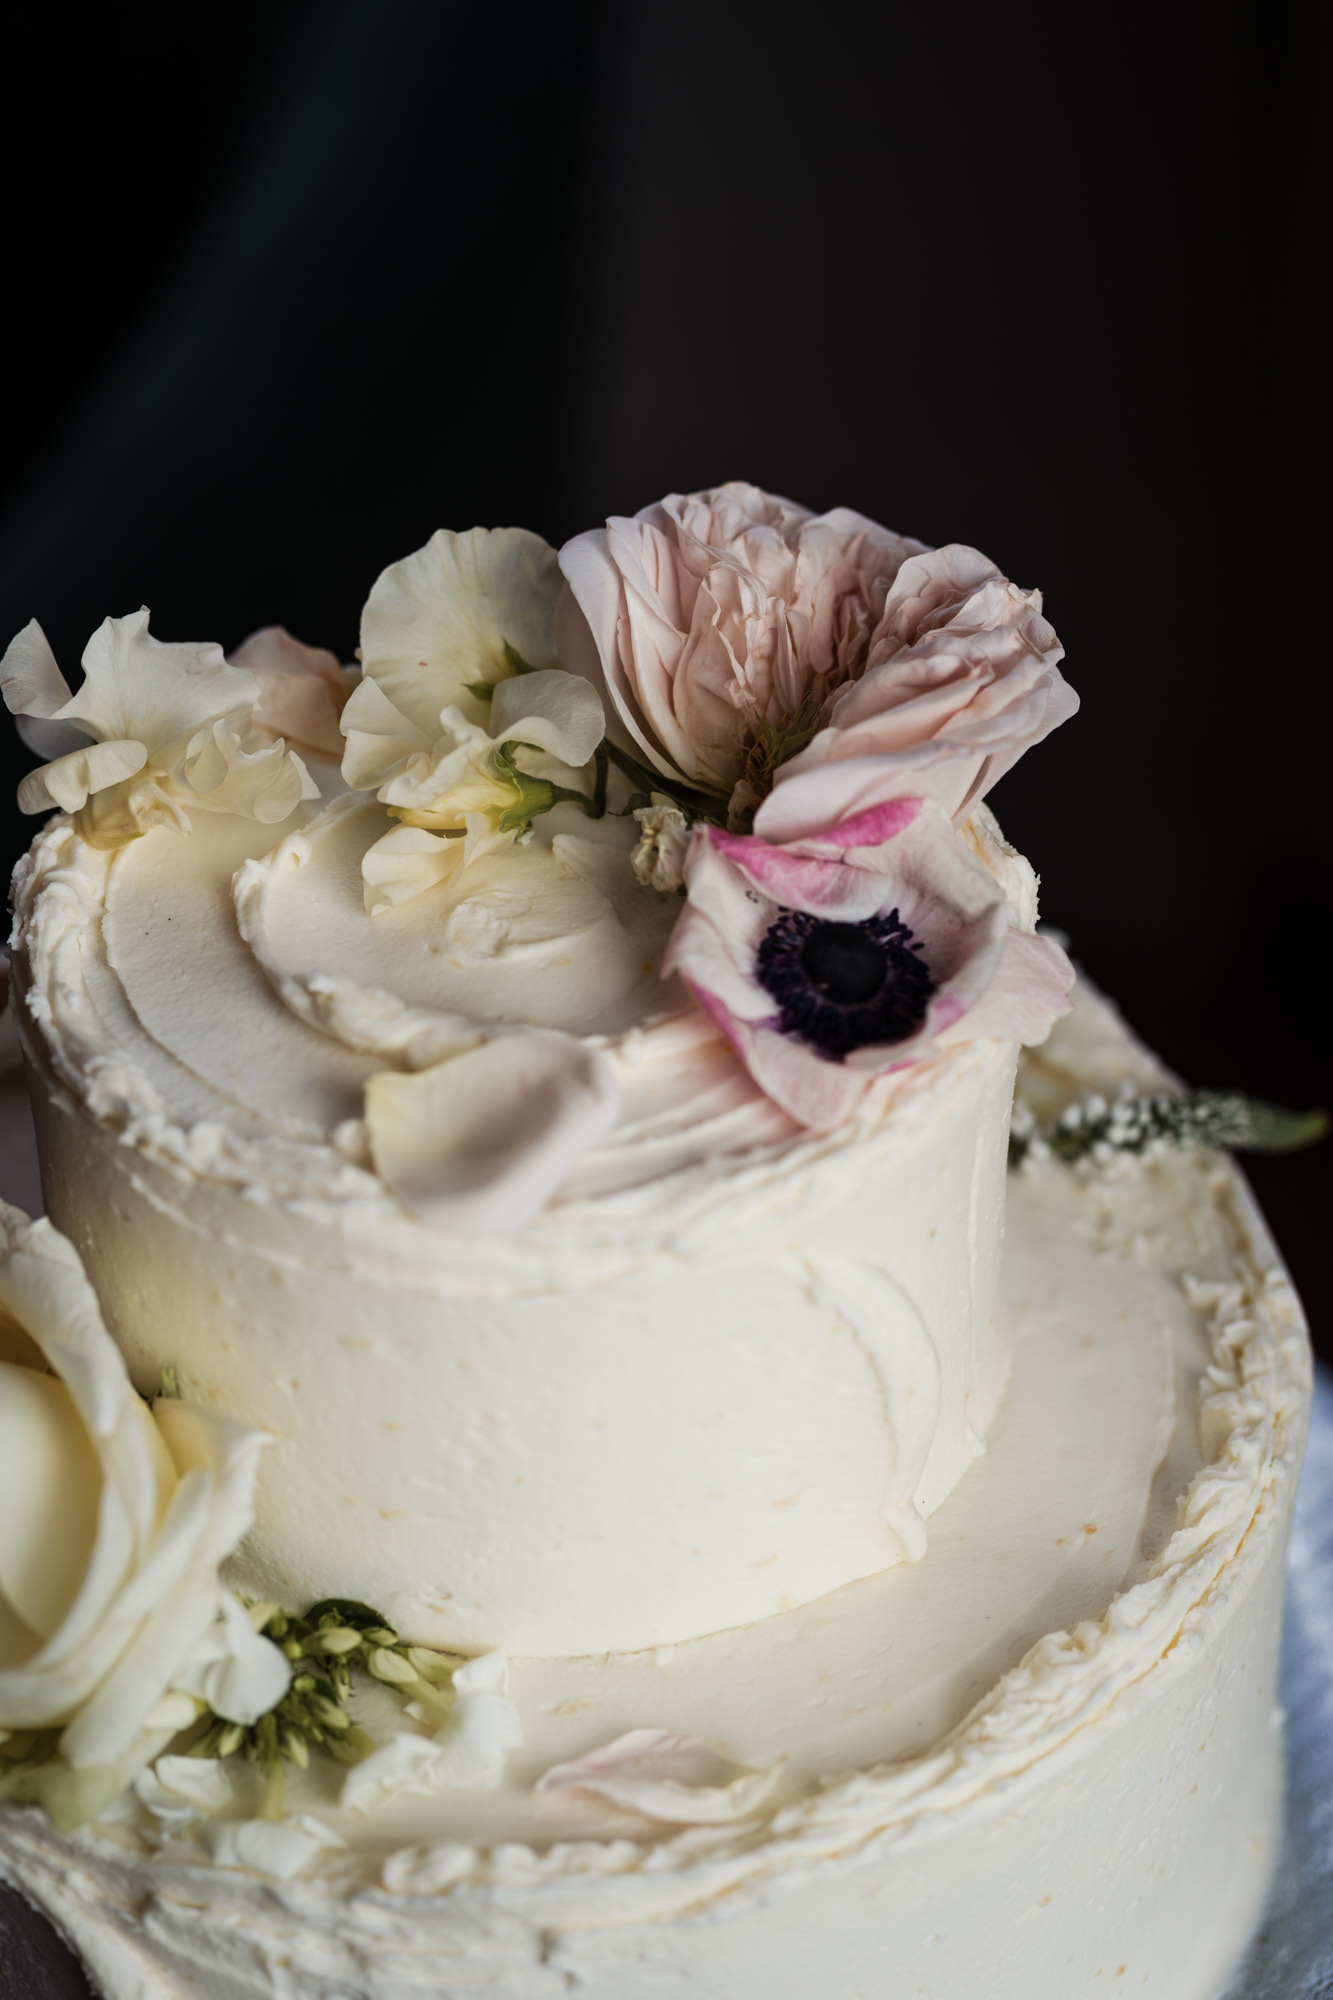 close up of pink flower on top of two tier white wedding cake from london's Violet Cakes By Claire Ptak